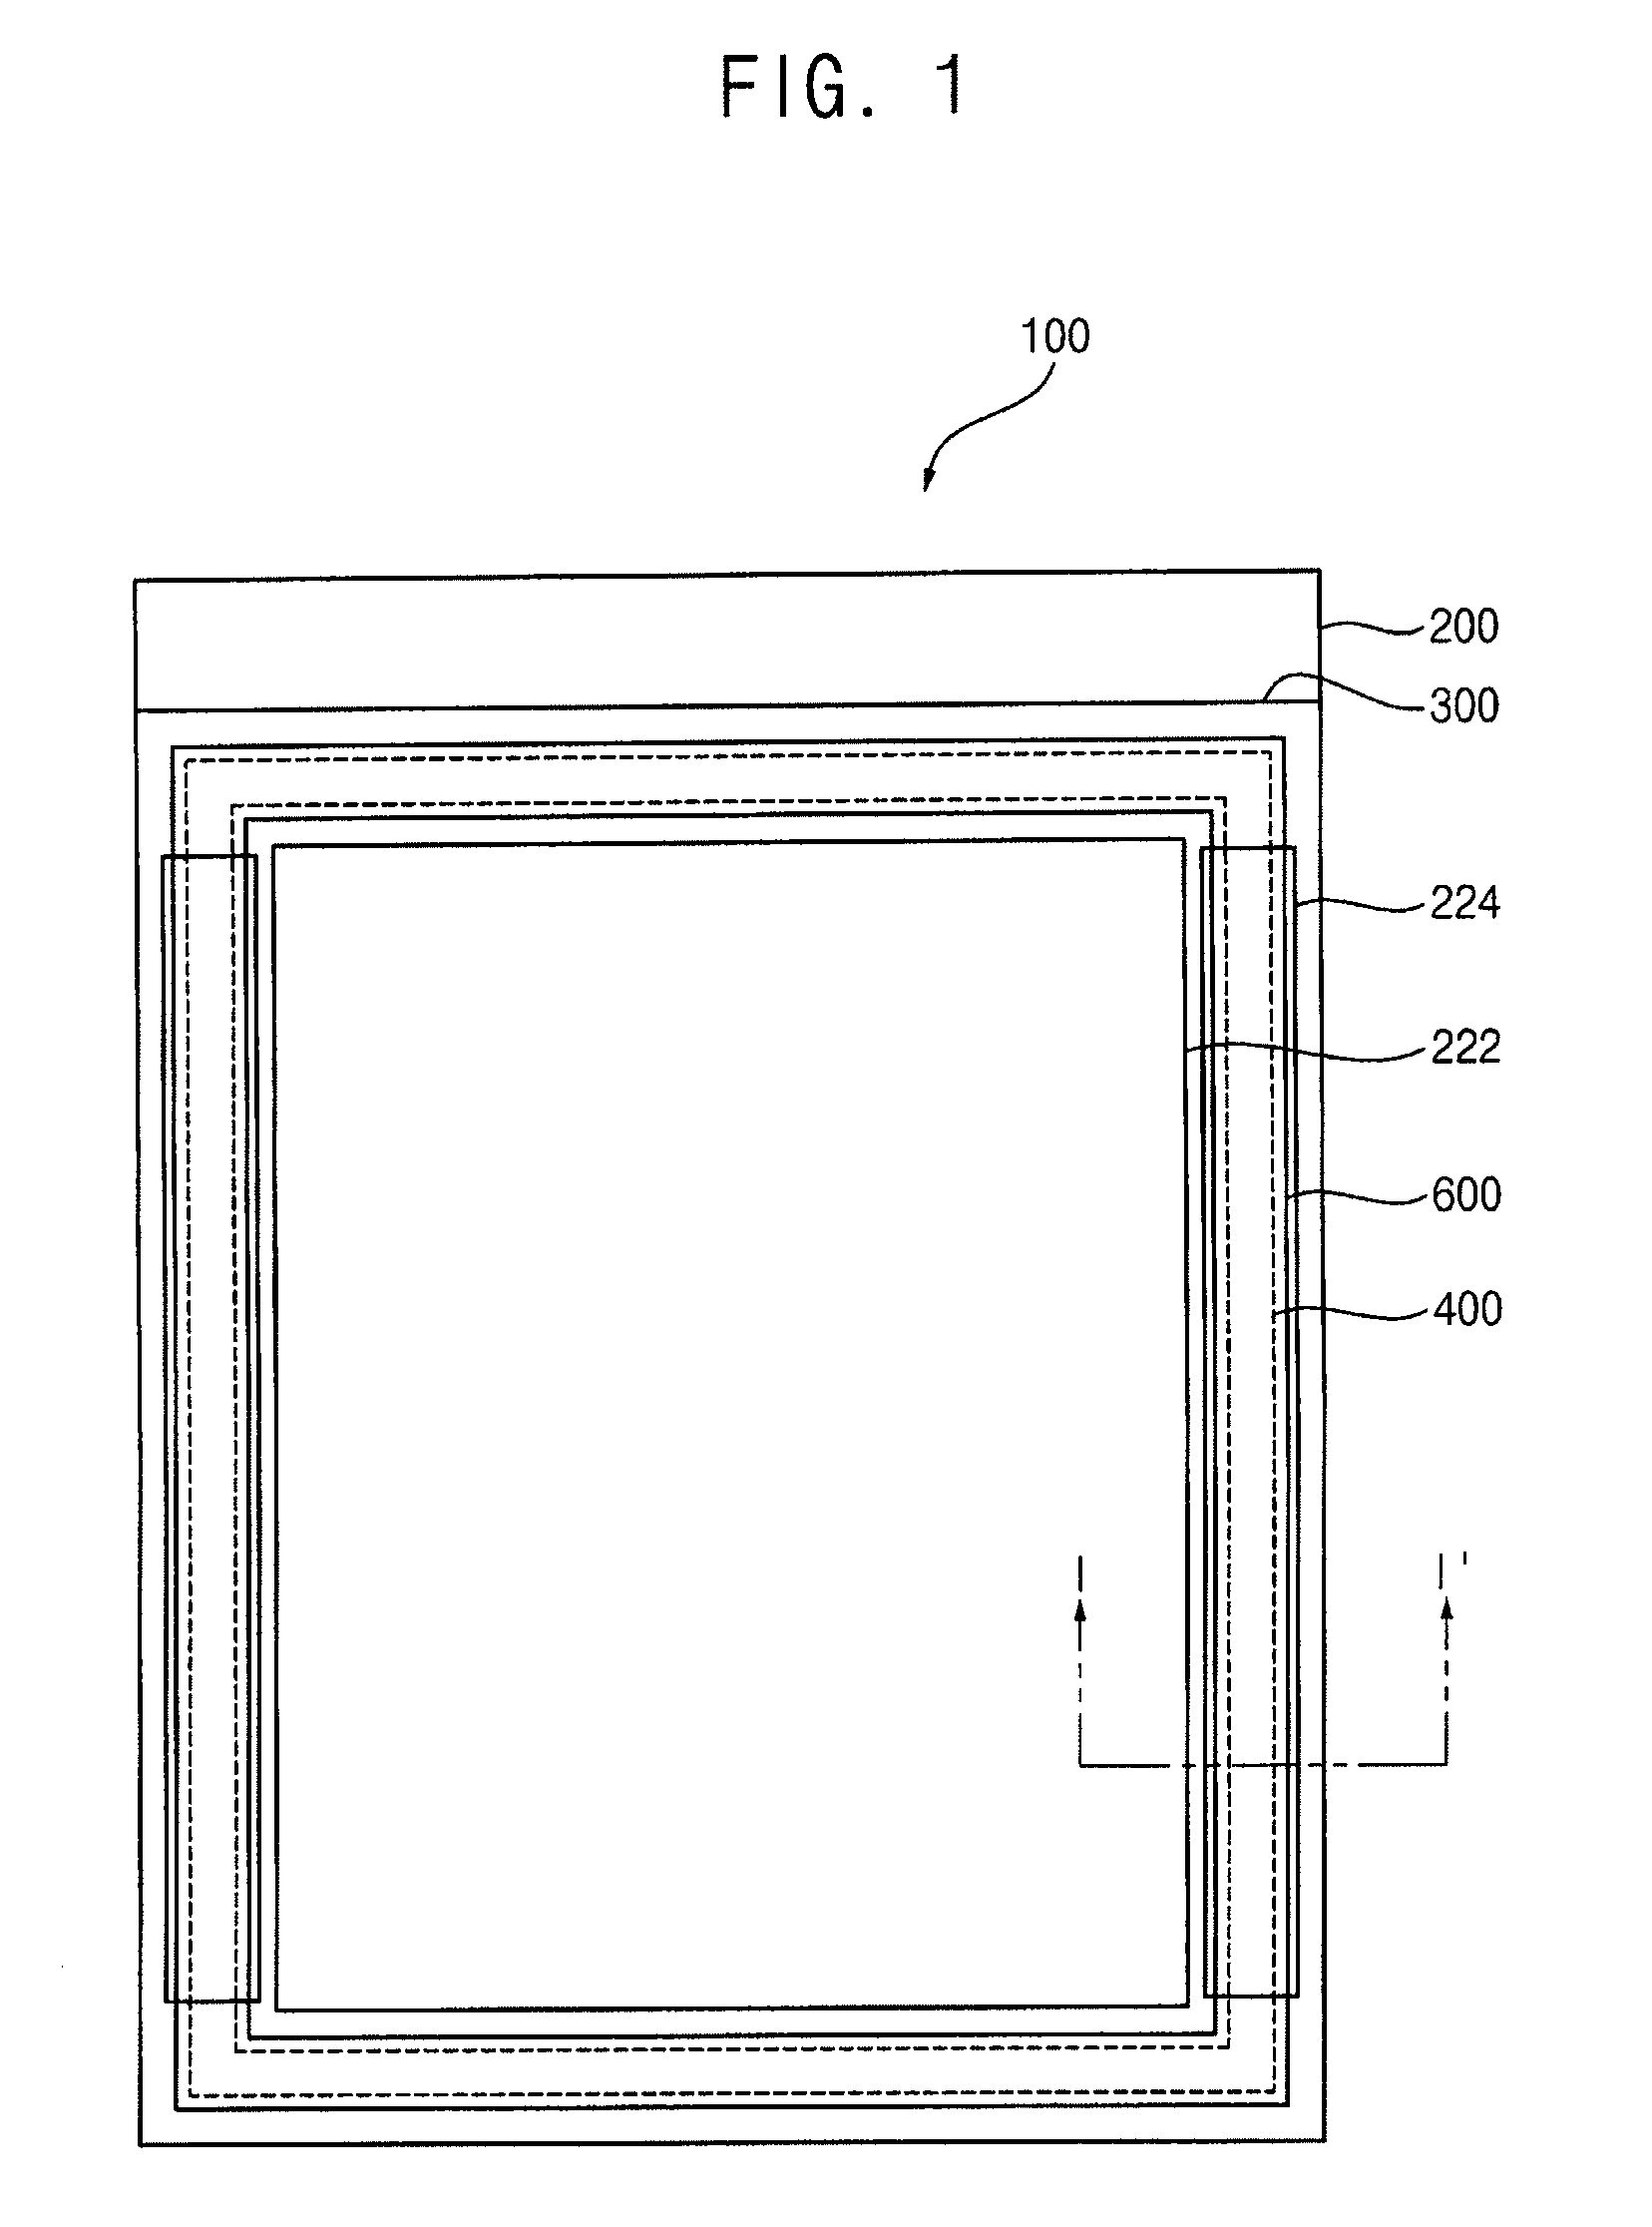 Display panel, method for manufacturing the same, motherboard for manufacturing the same and method for manufacturing a display substrate for the same